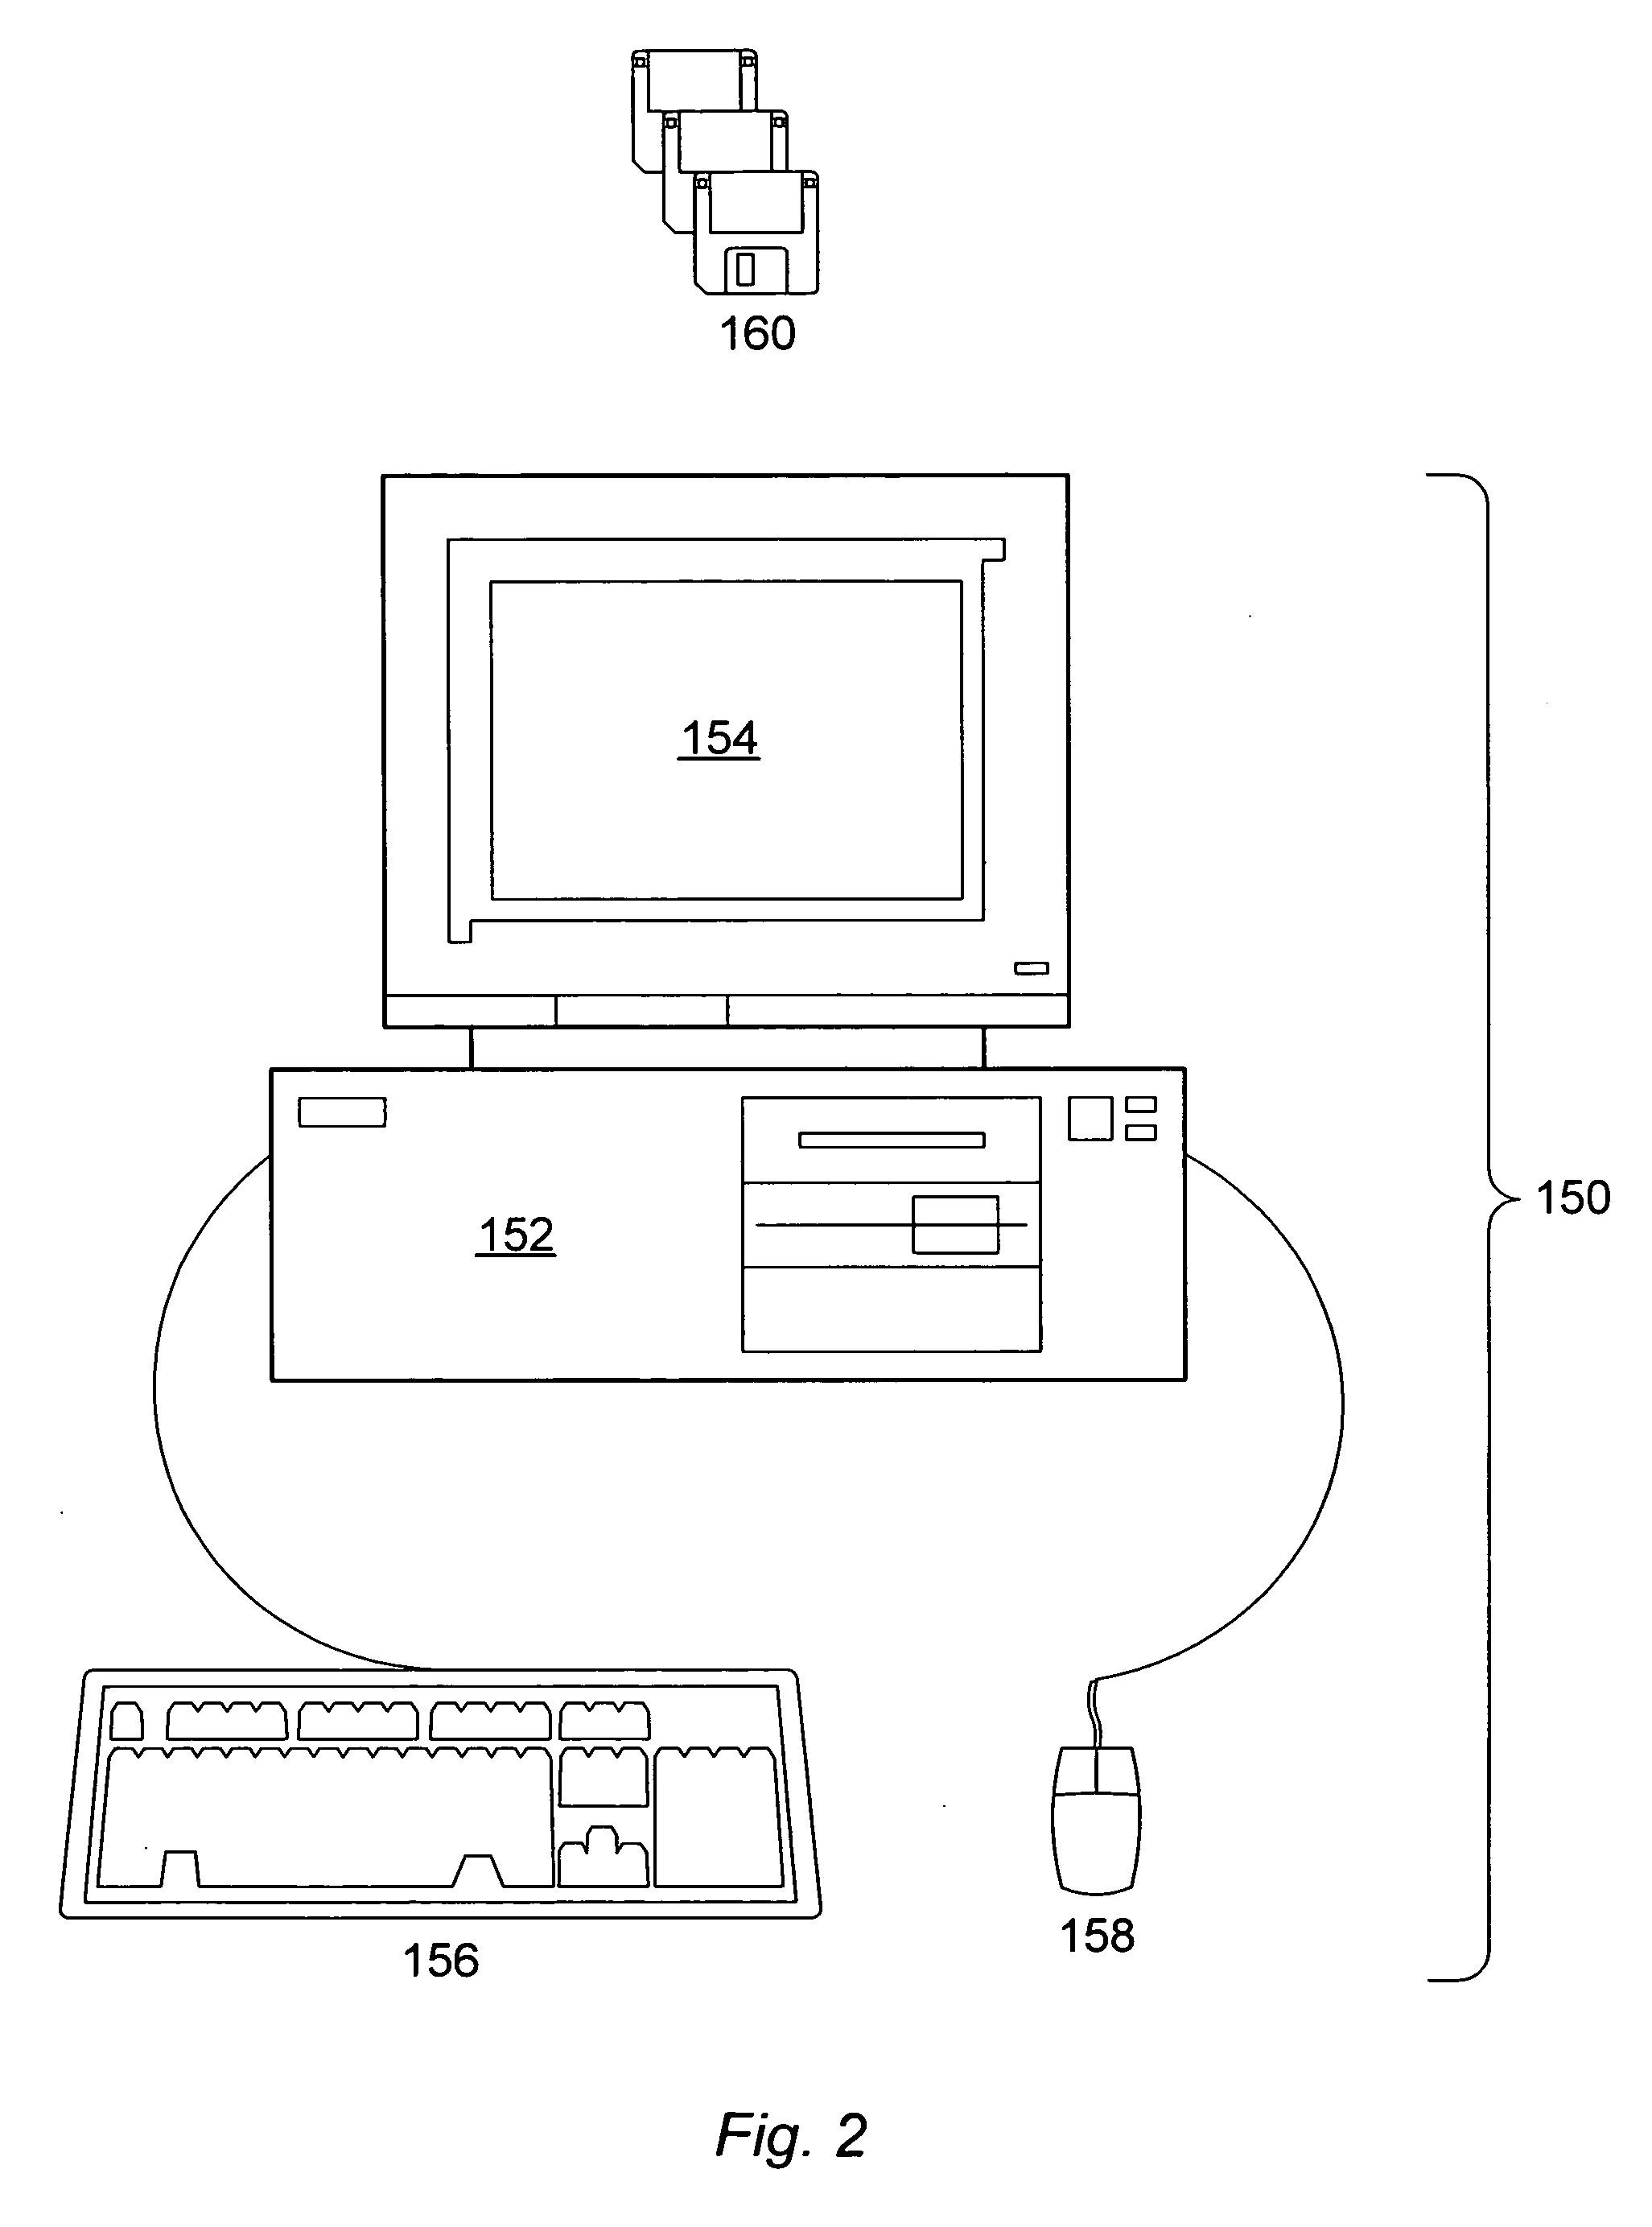 Systems and methods for handwriting analysis in documents